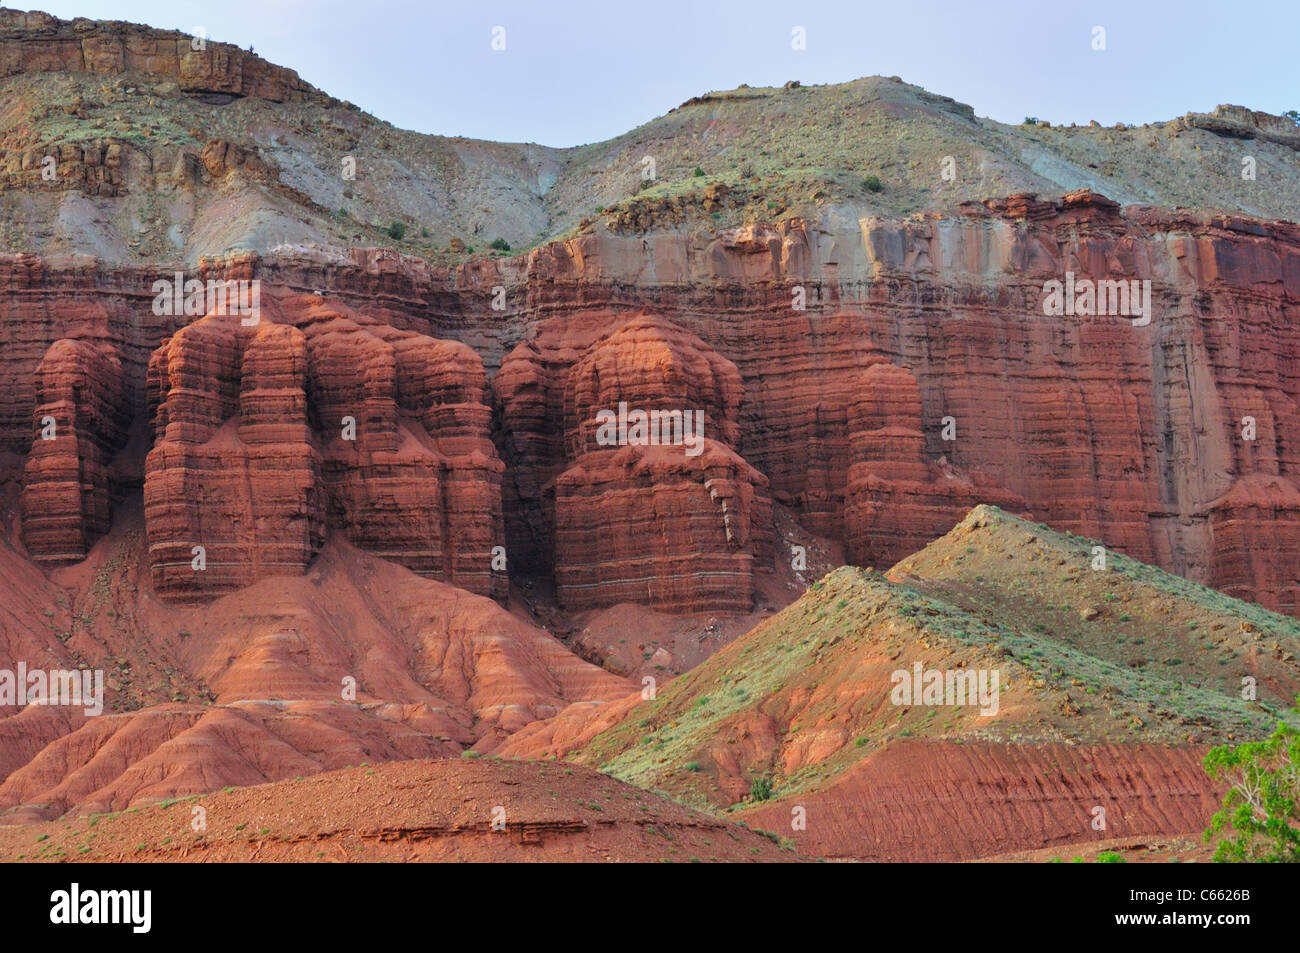 Multicolored sedimentary rock layers and formations are evident in the colorful cliffs of Capitol Reef National Park Stock Photo